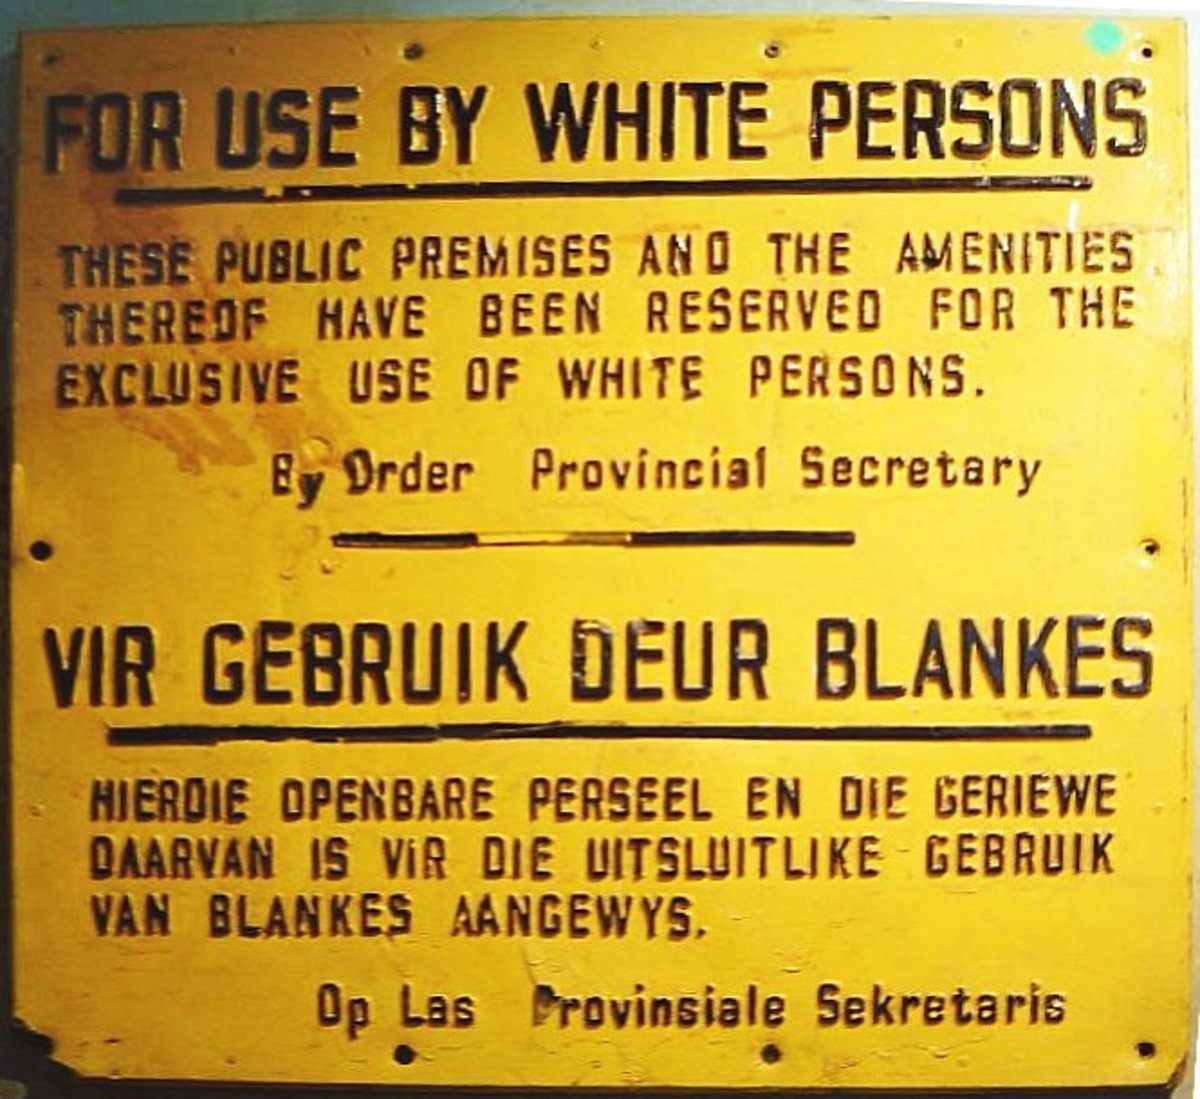 South Africa's Apartheid Policy of 1948